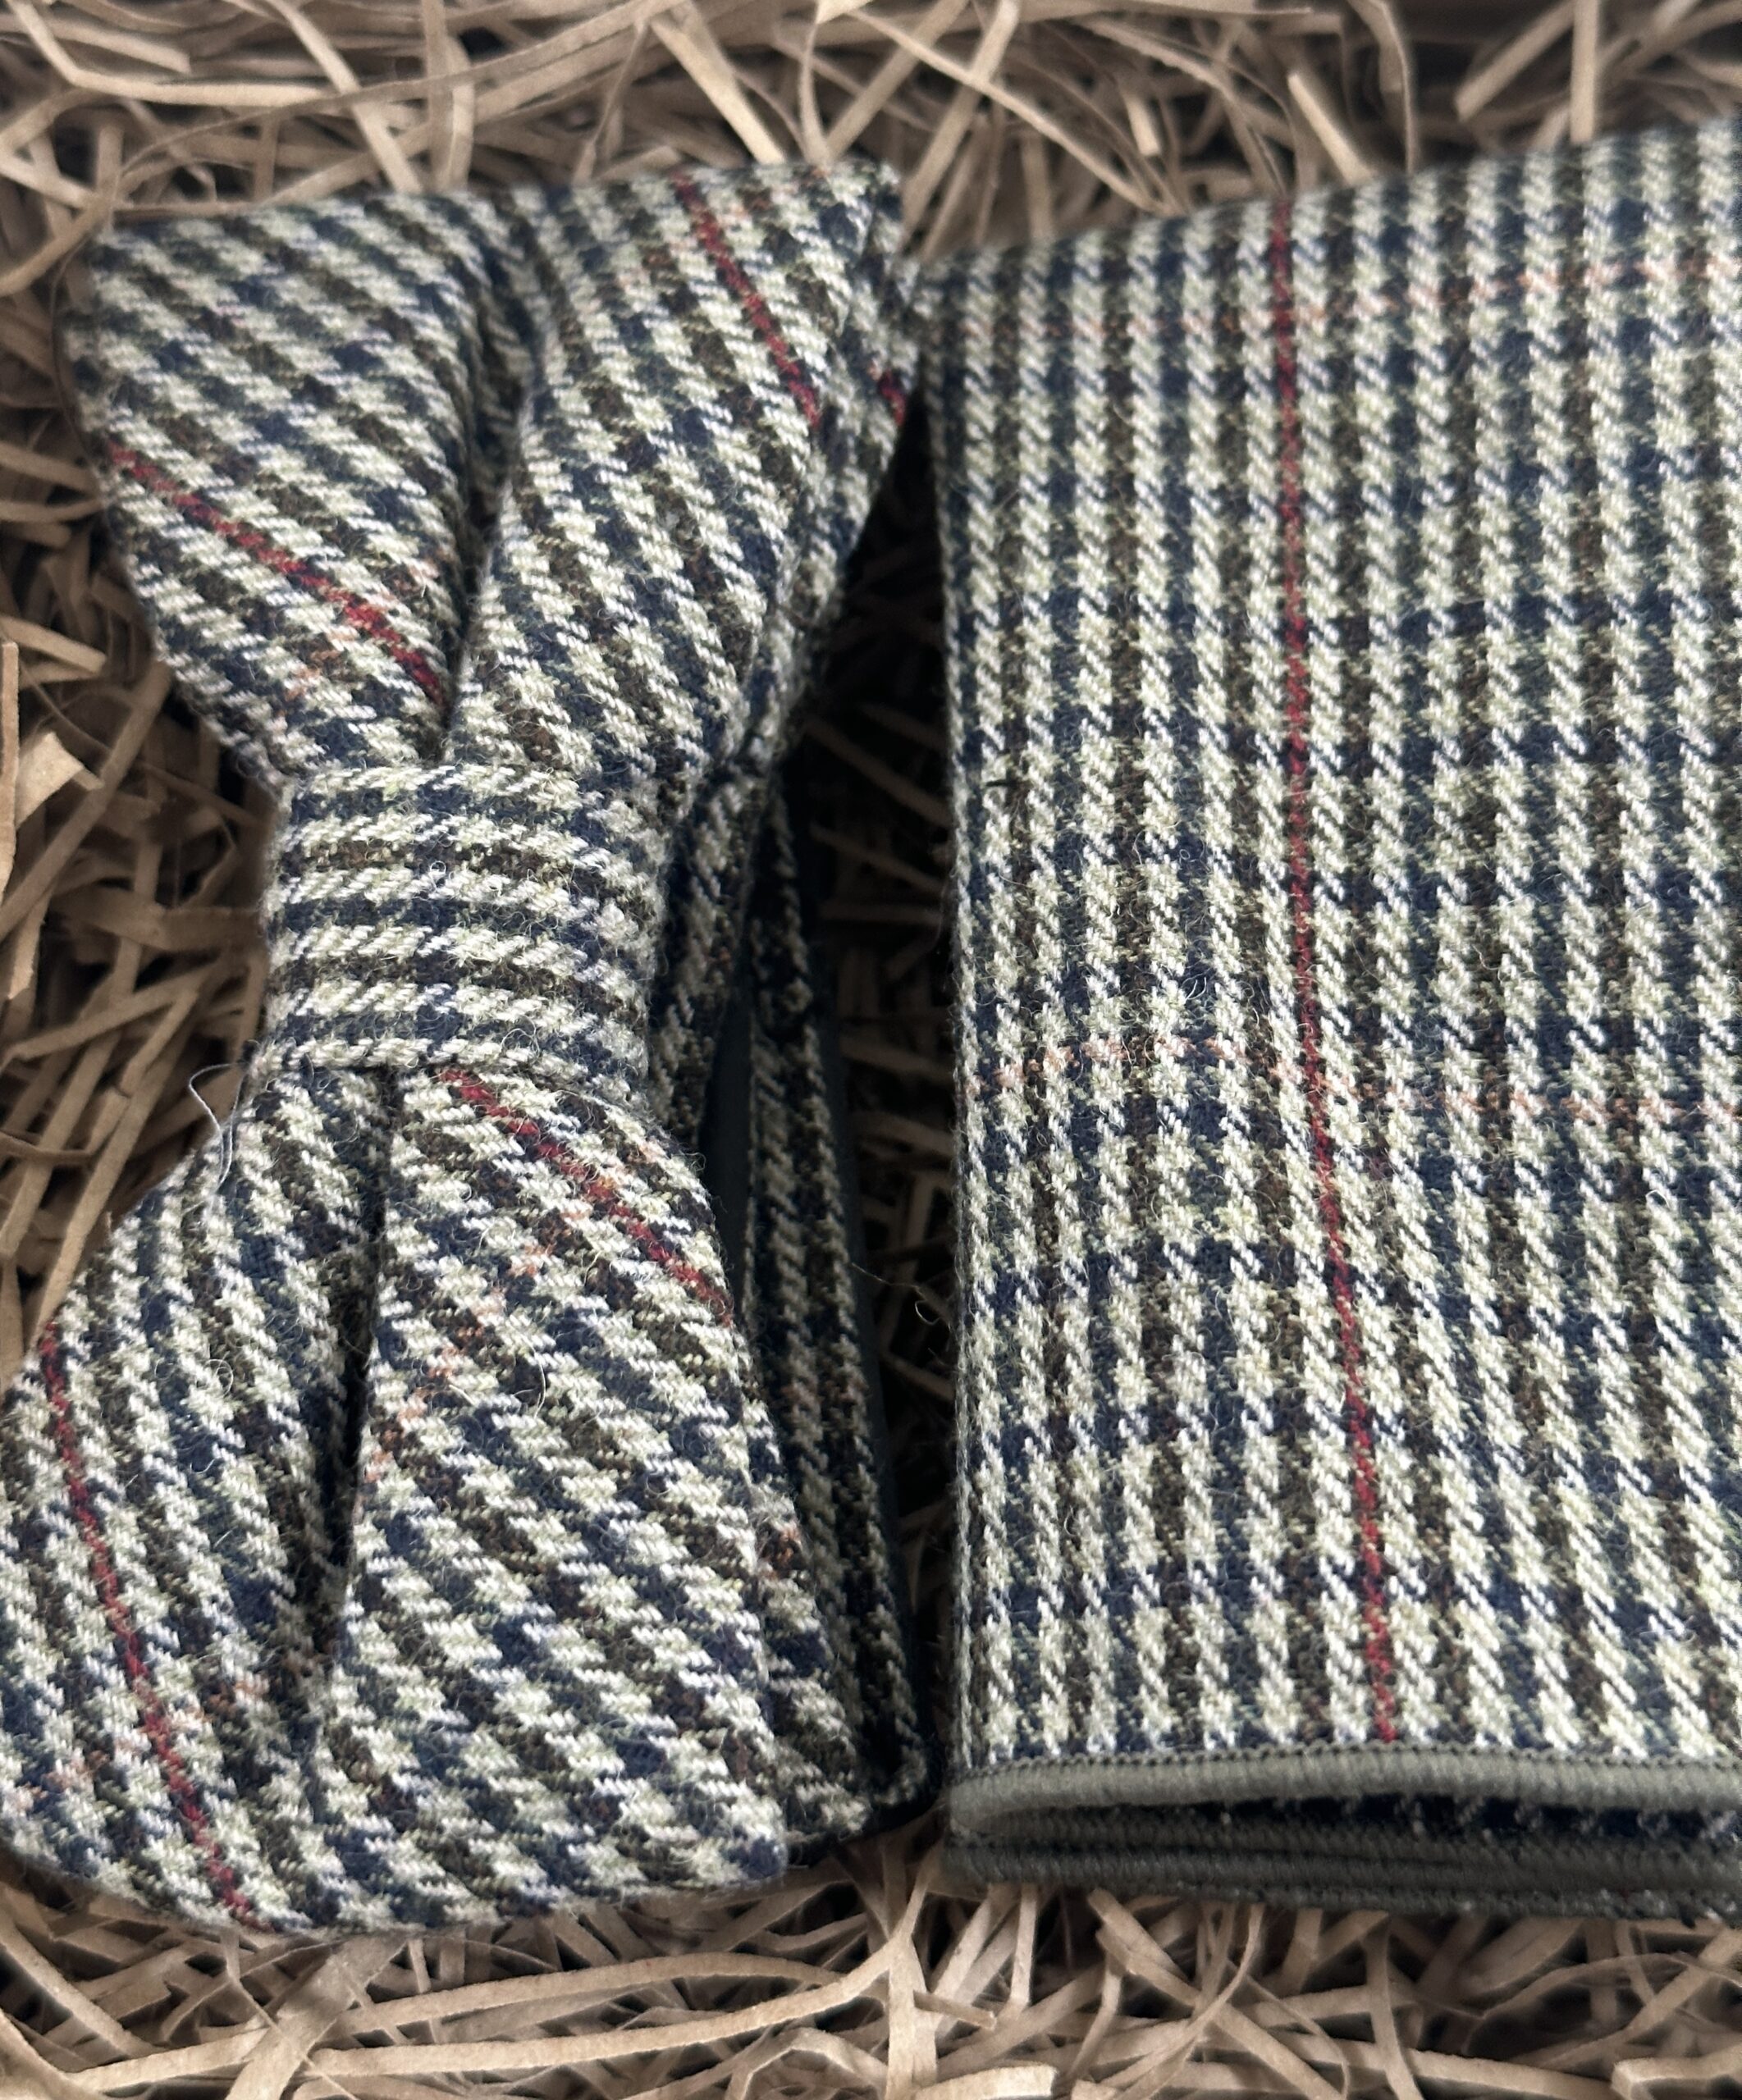 A photo of a checked bow tie and pocket square in wool